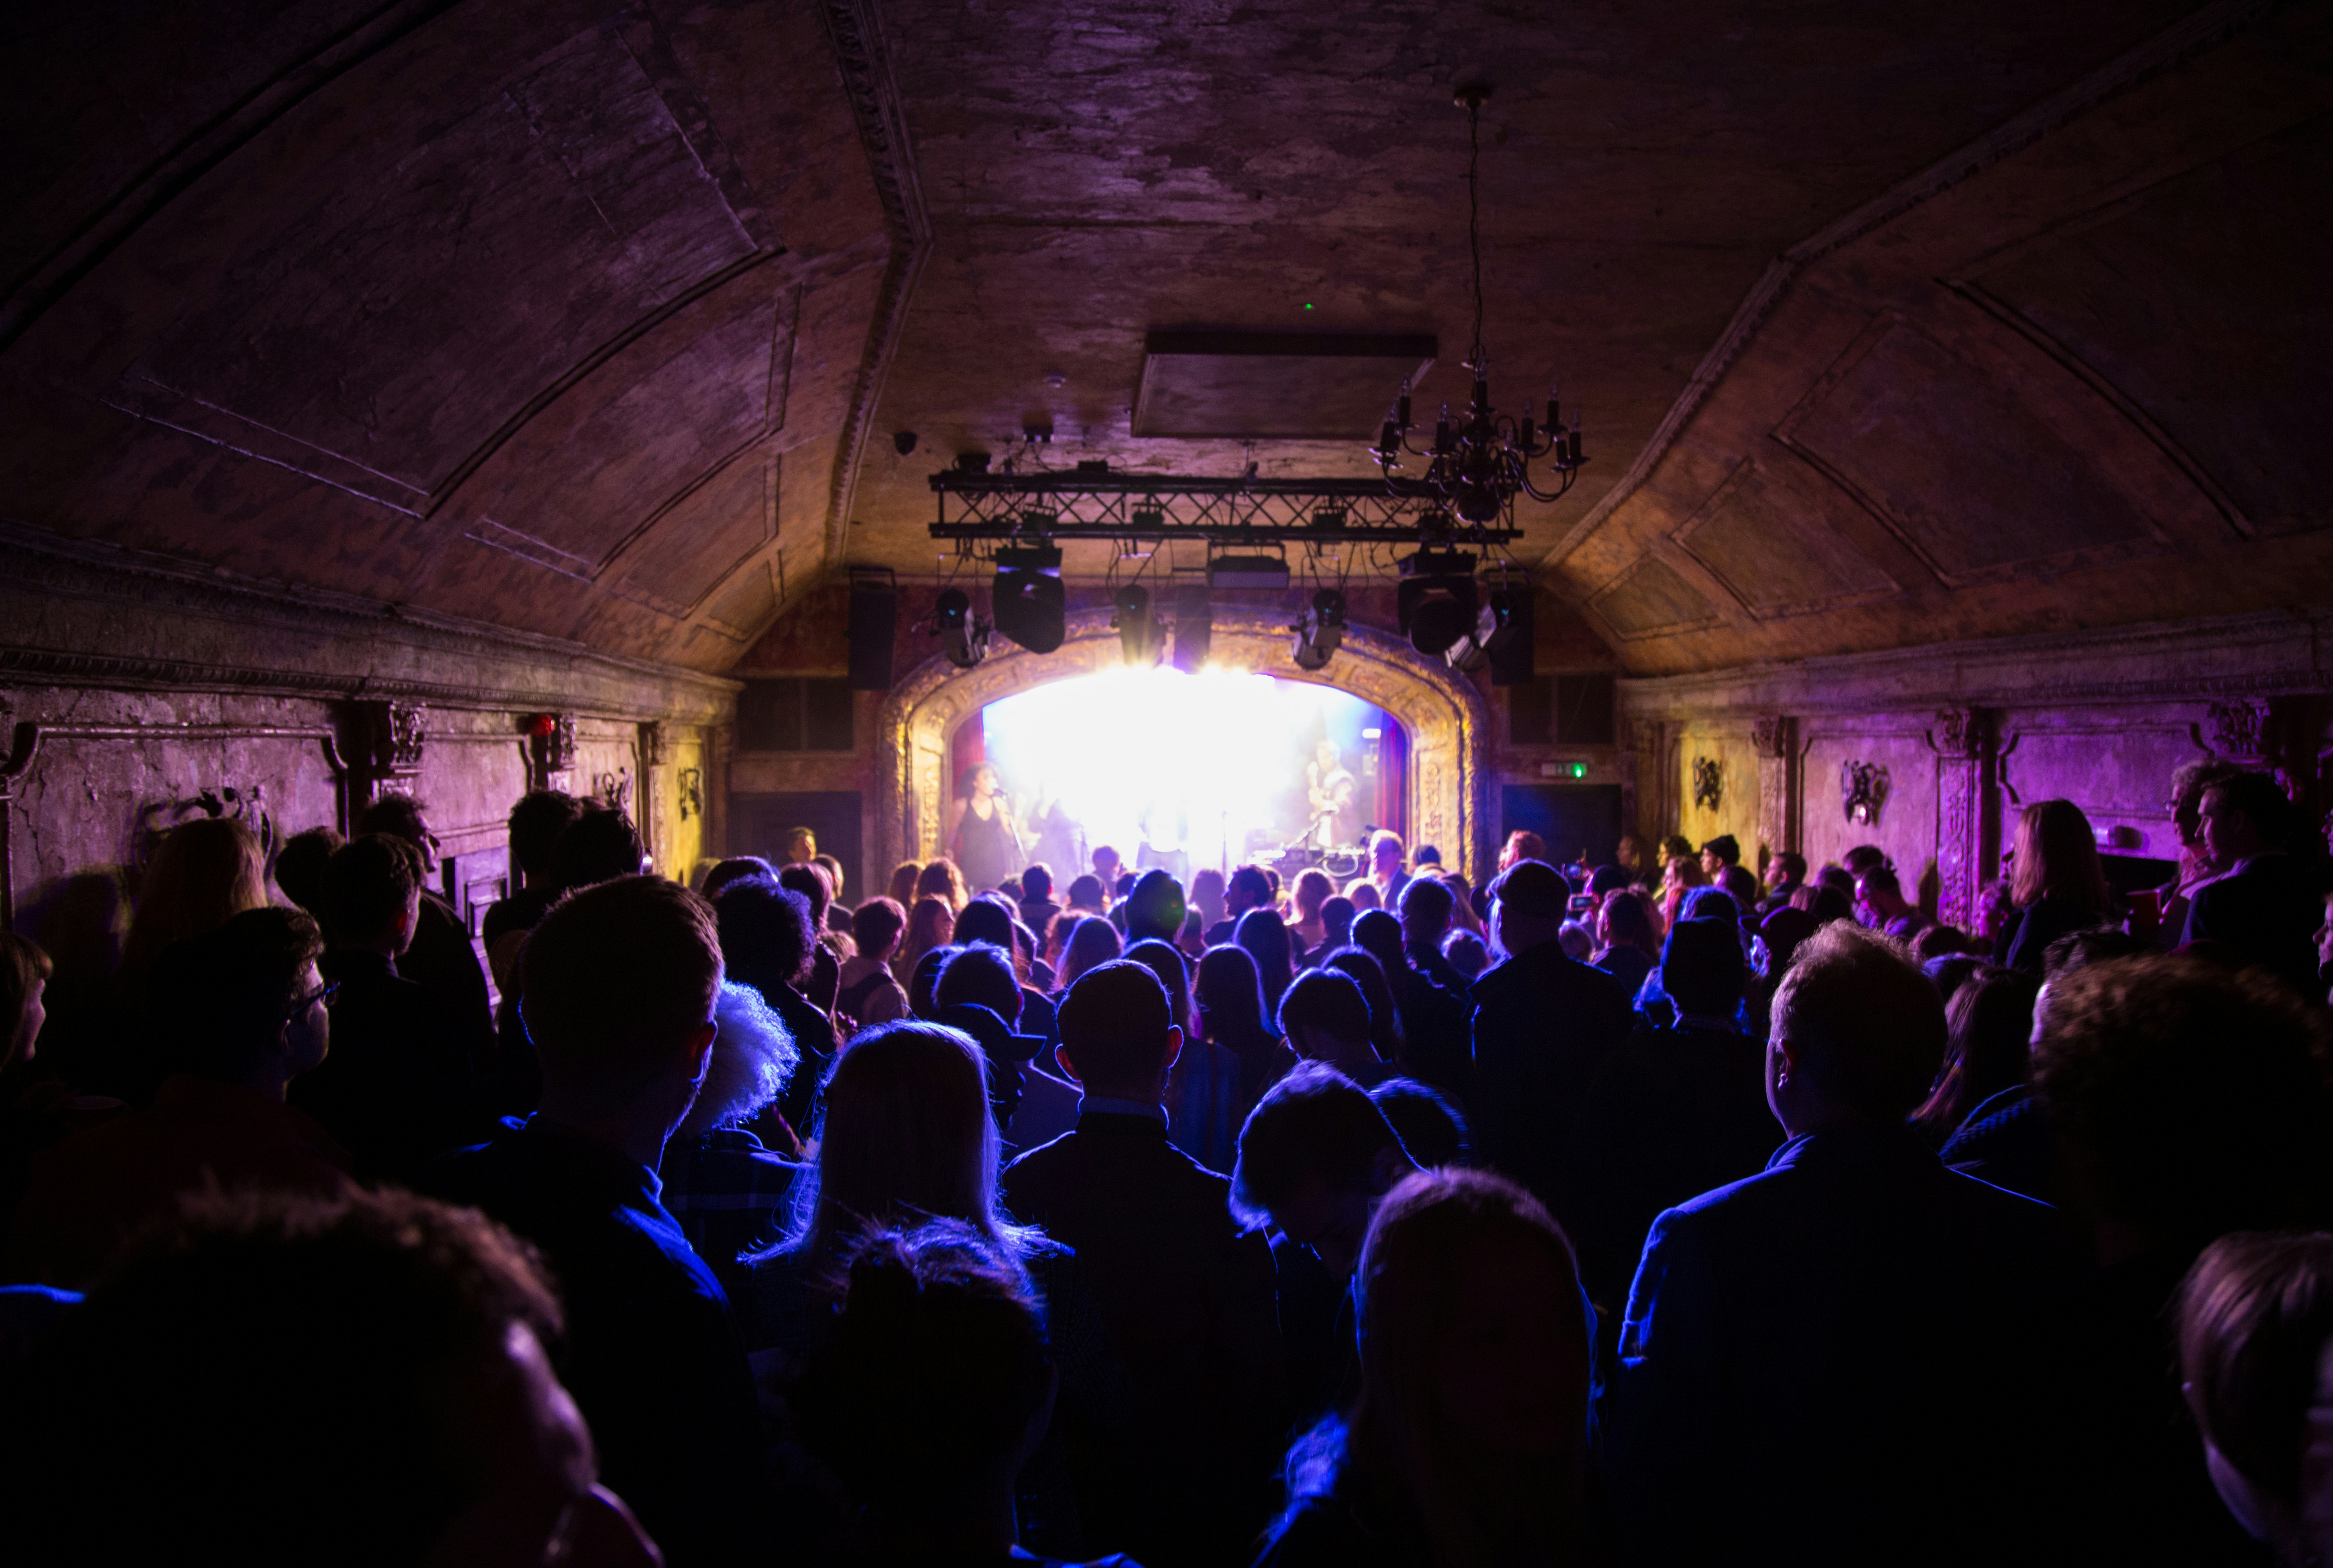 An audience view of the stage at Omeara, a small London music venue under a railway arch.